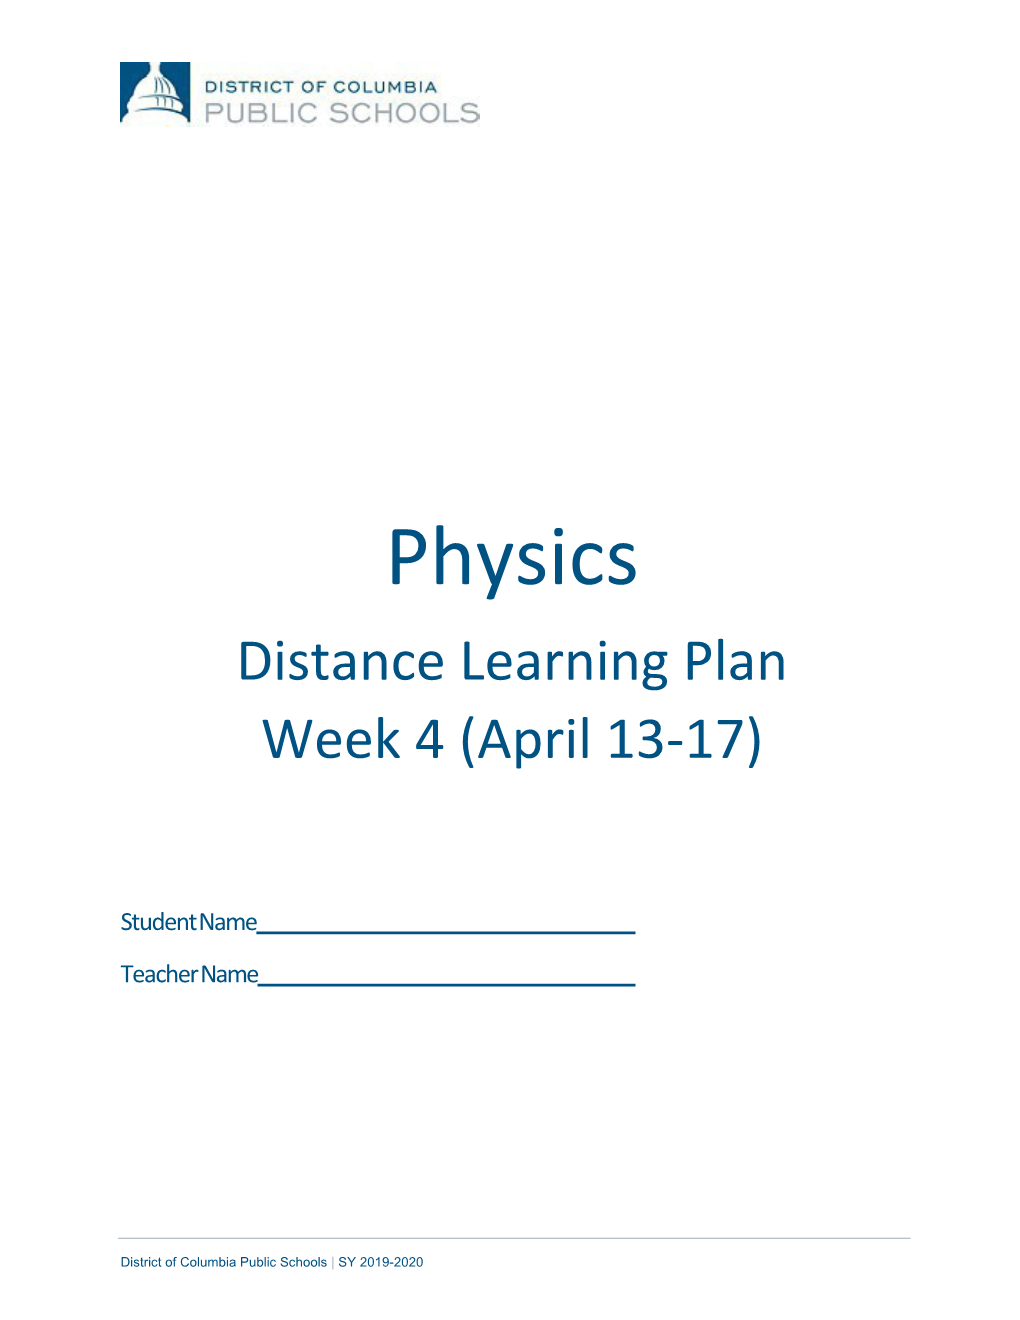 Physics Distance Learning Plan Week 4 (April 13-17)